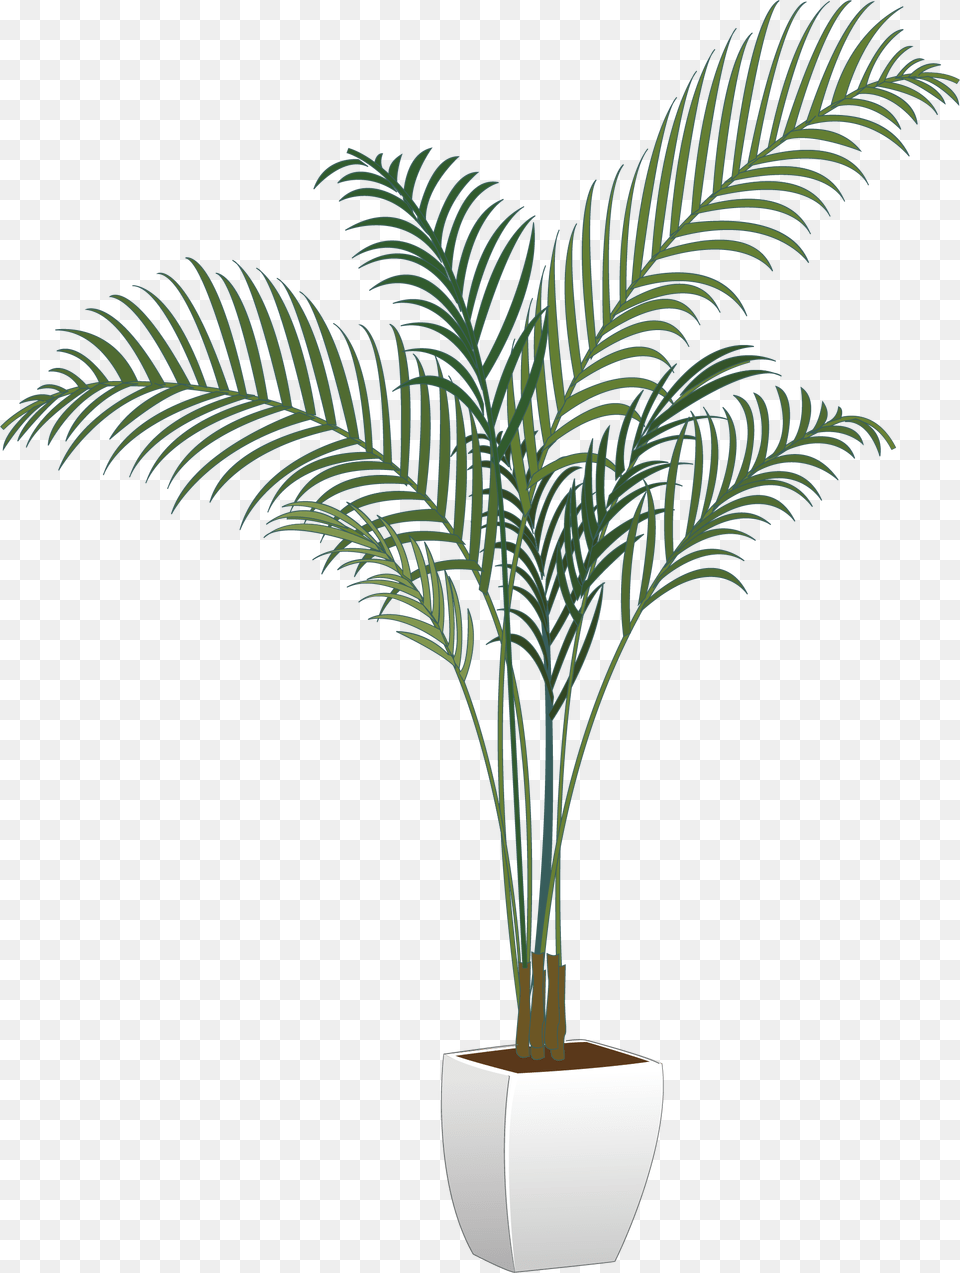 House Plant Potted Plant Transparent, Palm Tree, Potted Plant, Tree, Leaf Png Image